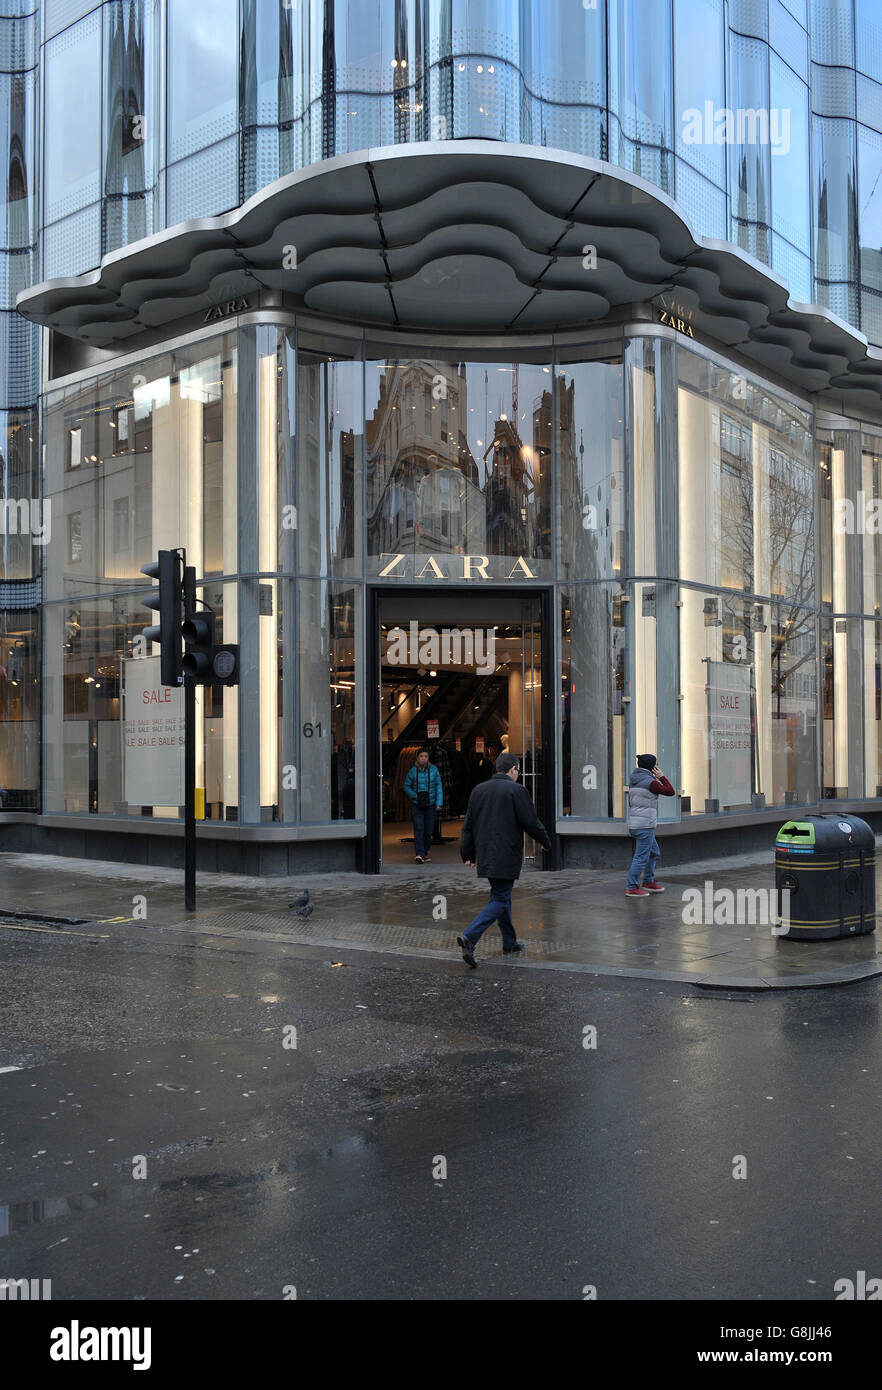 The zara store in oxford street hi-res stock photography and images - Alamy